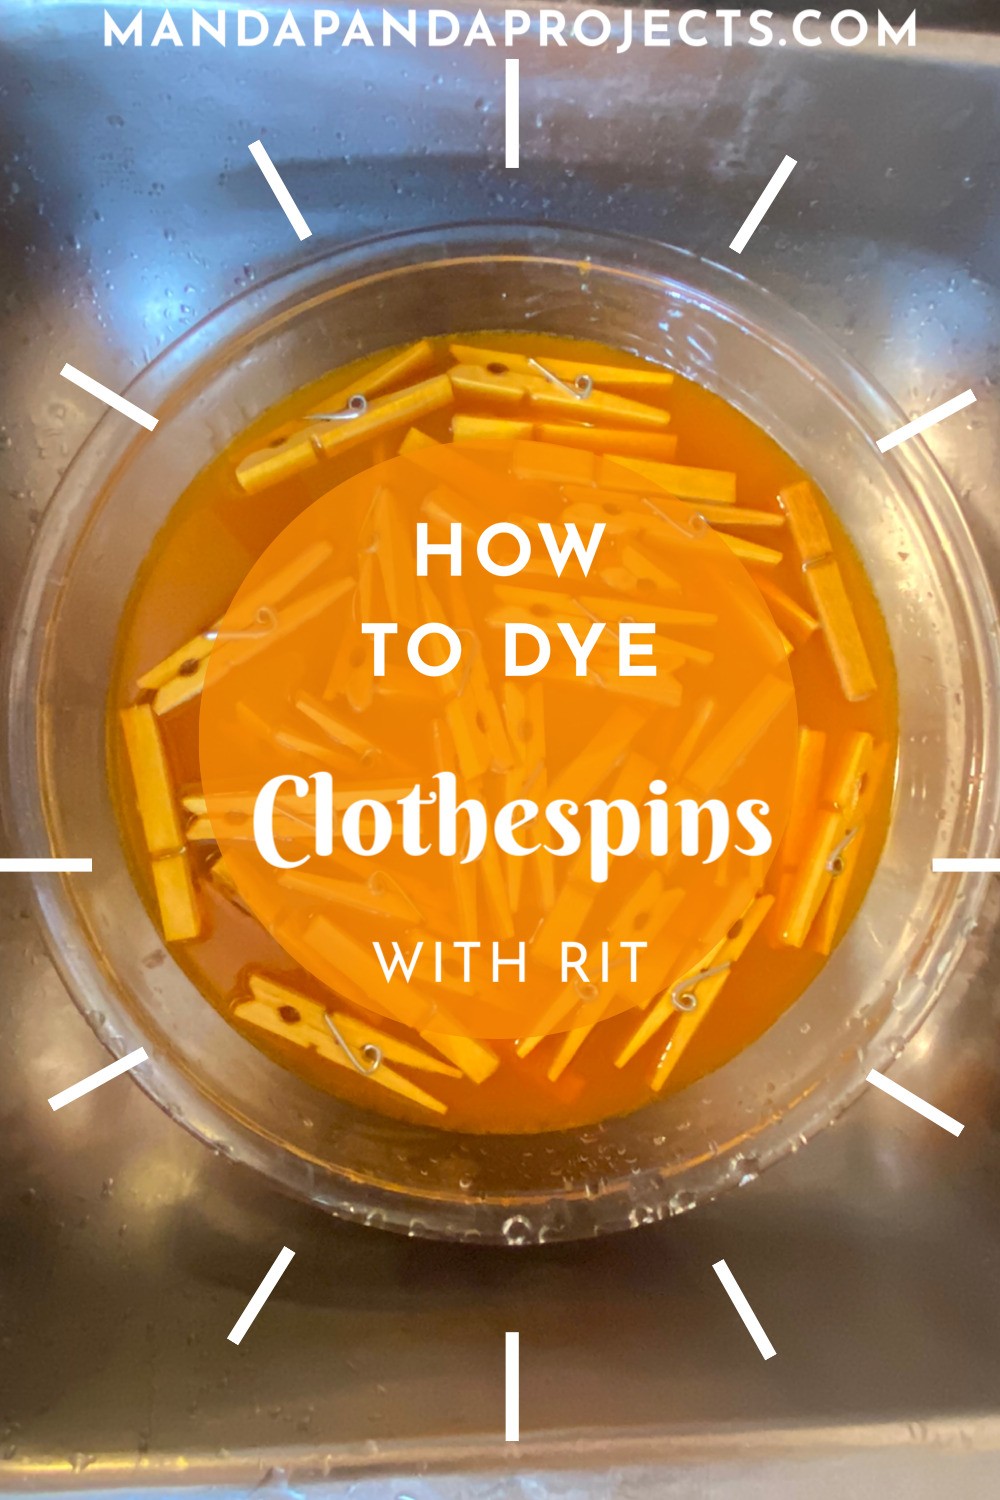 How to Dye Clothespins with RIT #clothespincrafts